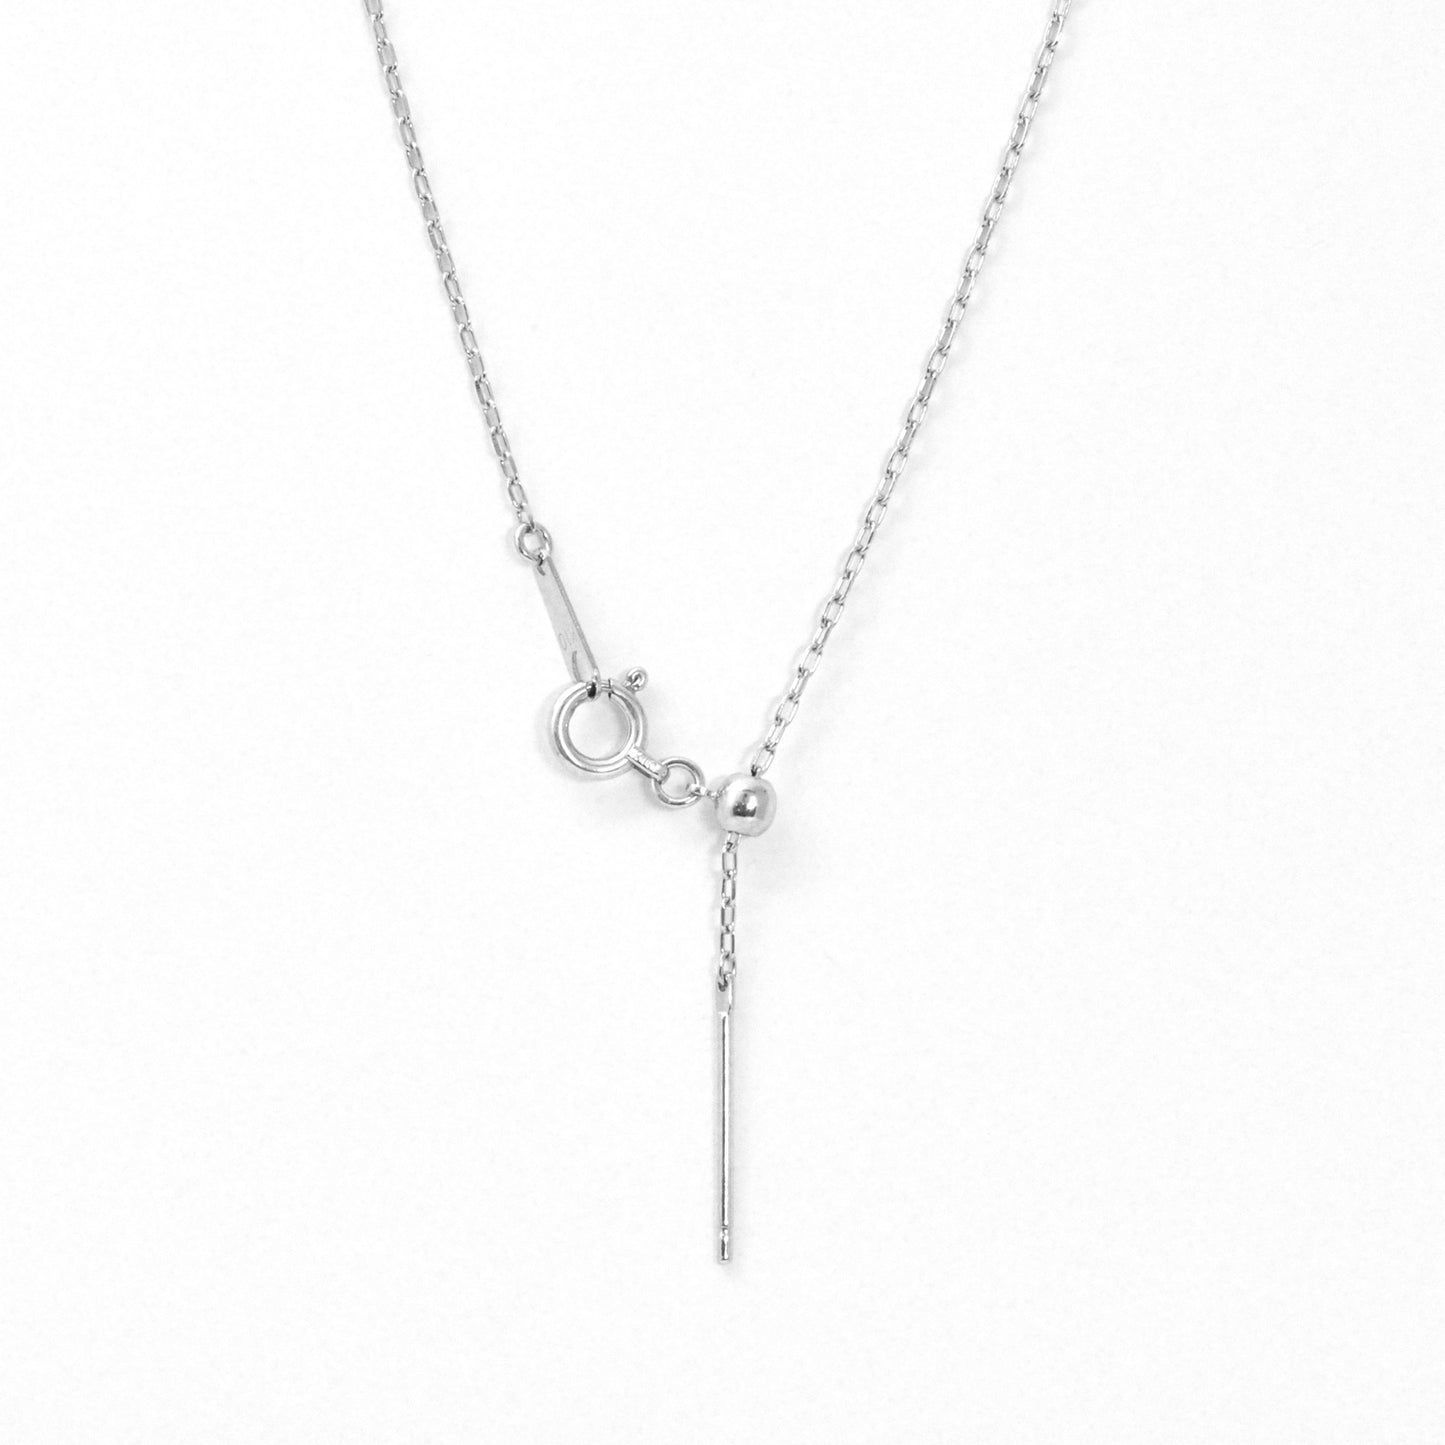 [Palette] 10K White Gold Slide Pin Chain Necklace - Product Image